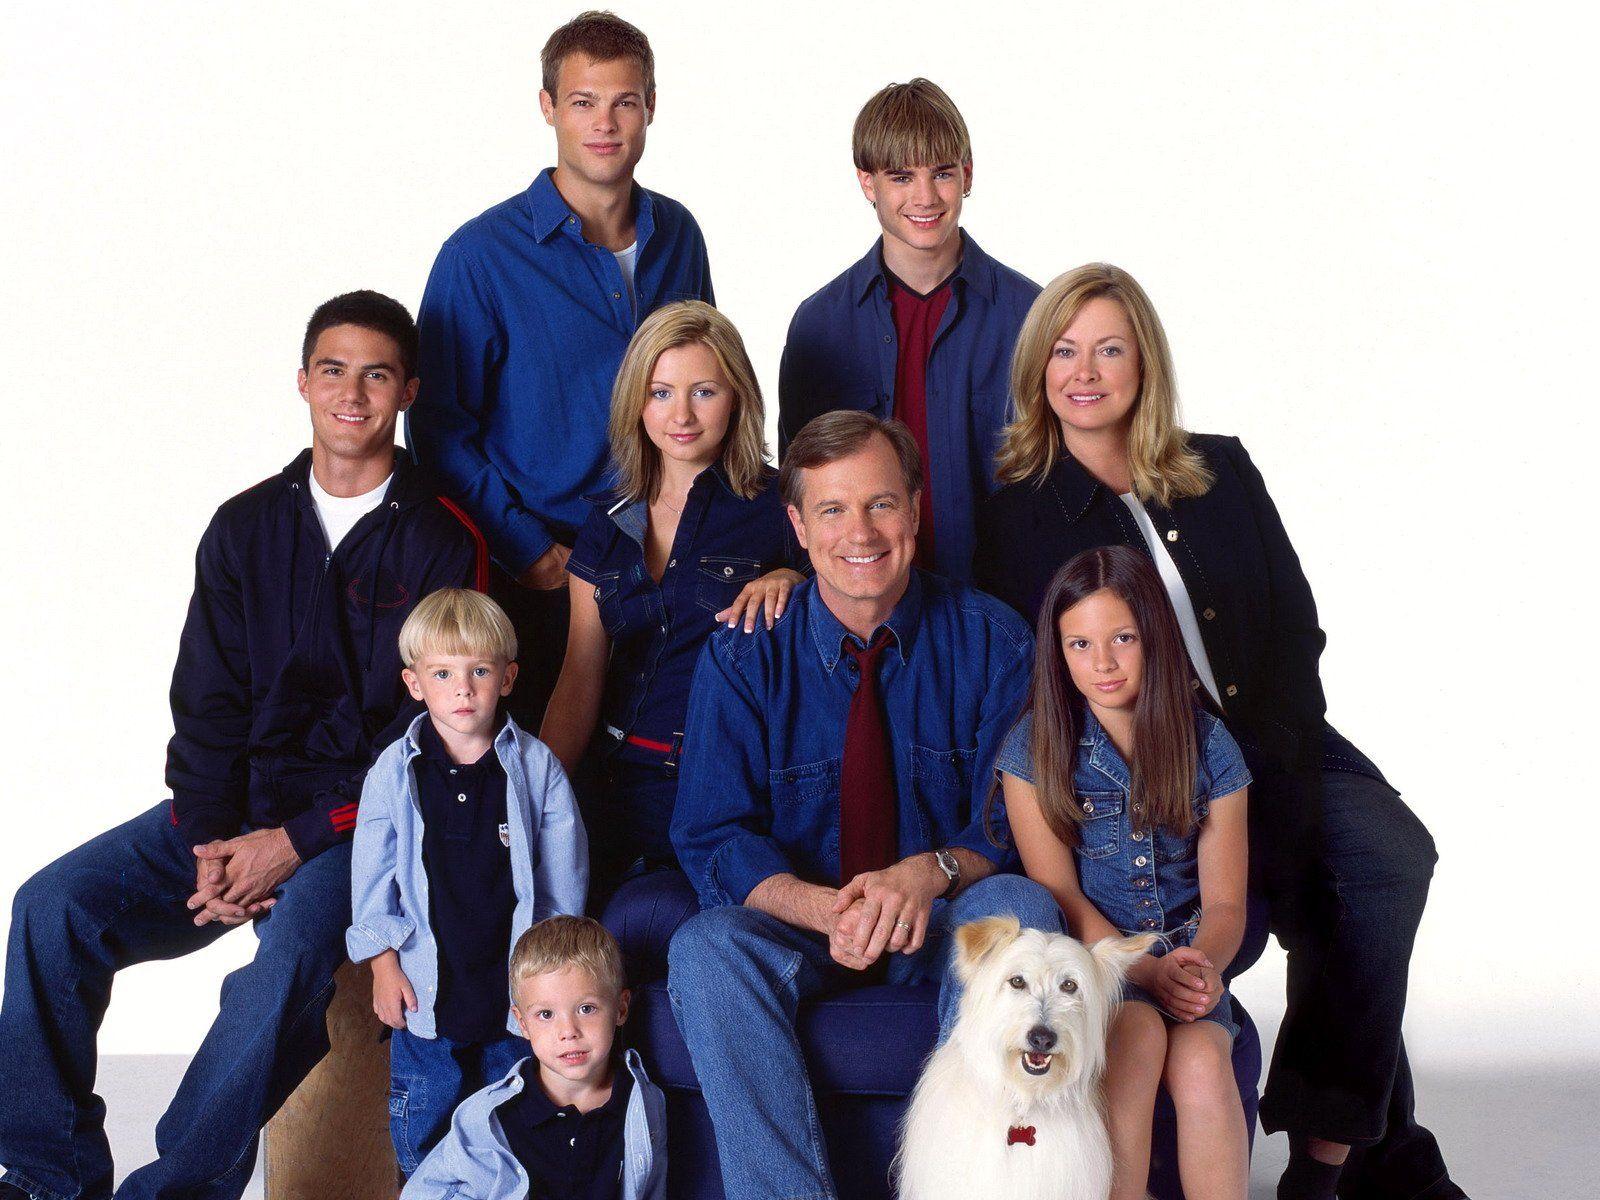 7th Heaven image 7th Heaven HD wallpaper and background photo